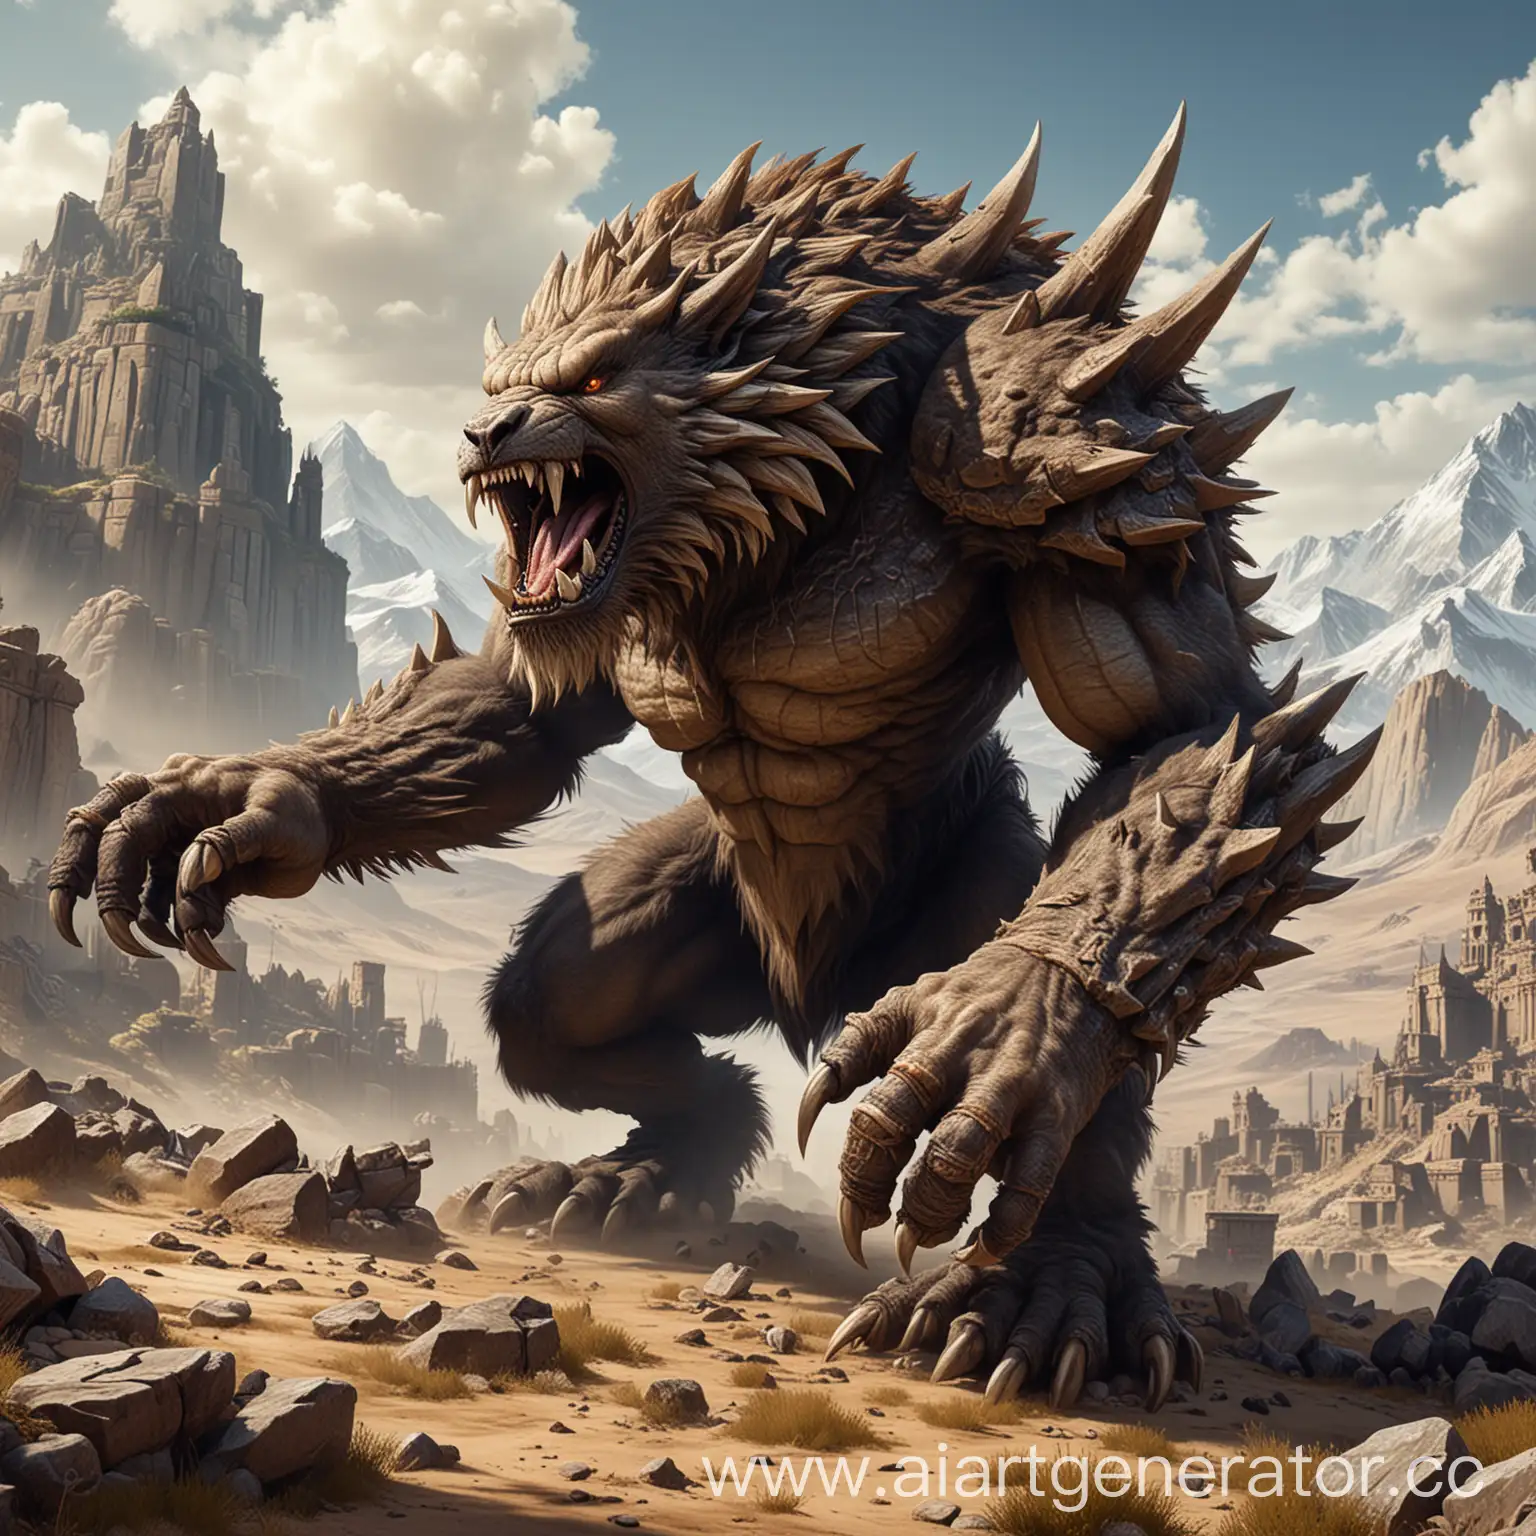 a huge Behemoth and Ancient Behemoth is a 100 percent hairy creature with a place of hands three large claws from the game heroes of might and magic 3 with massive paws a hump a lot of untidy gray fur a large lower jaw with fangs against the background of mountains and ruins and deserts claws, monster, no humans, open mouth, transparent background Three very large claws place the fingers in a full very